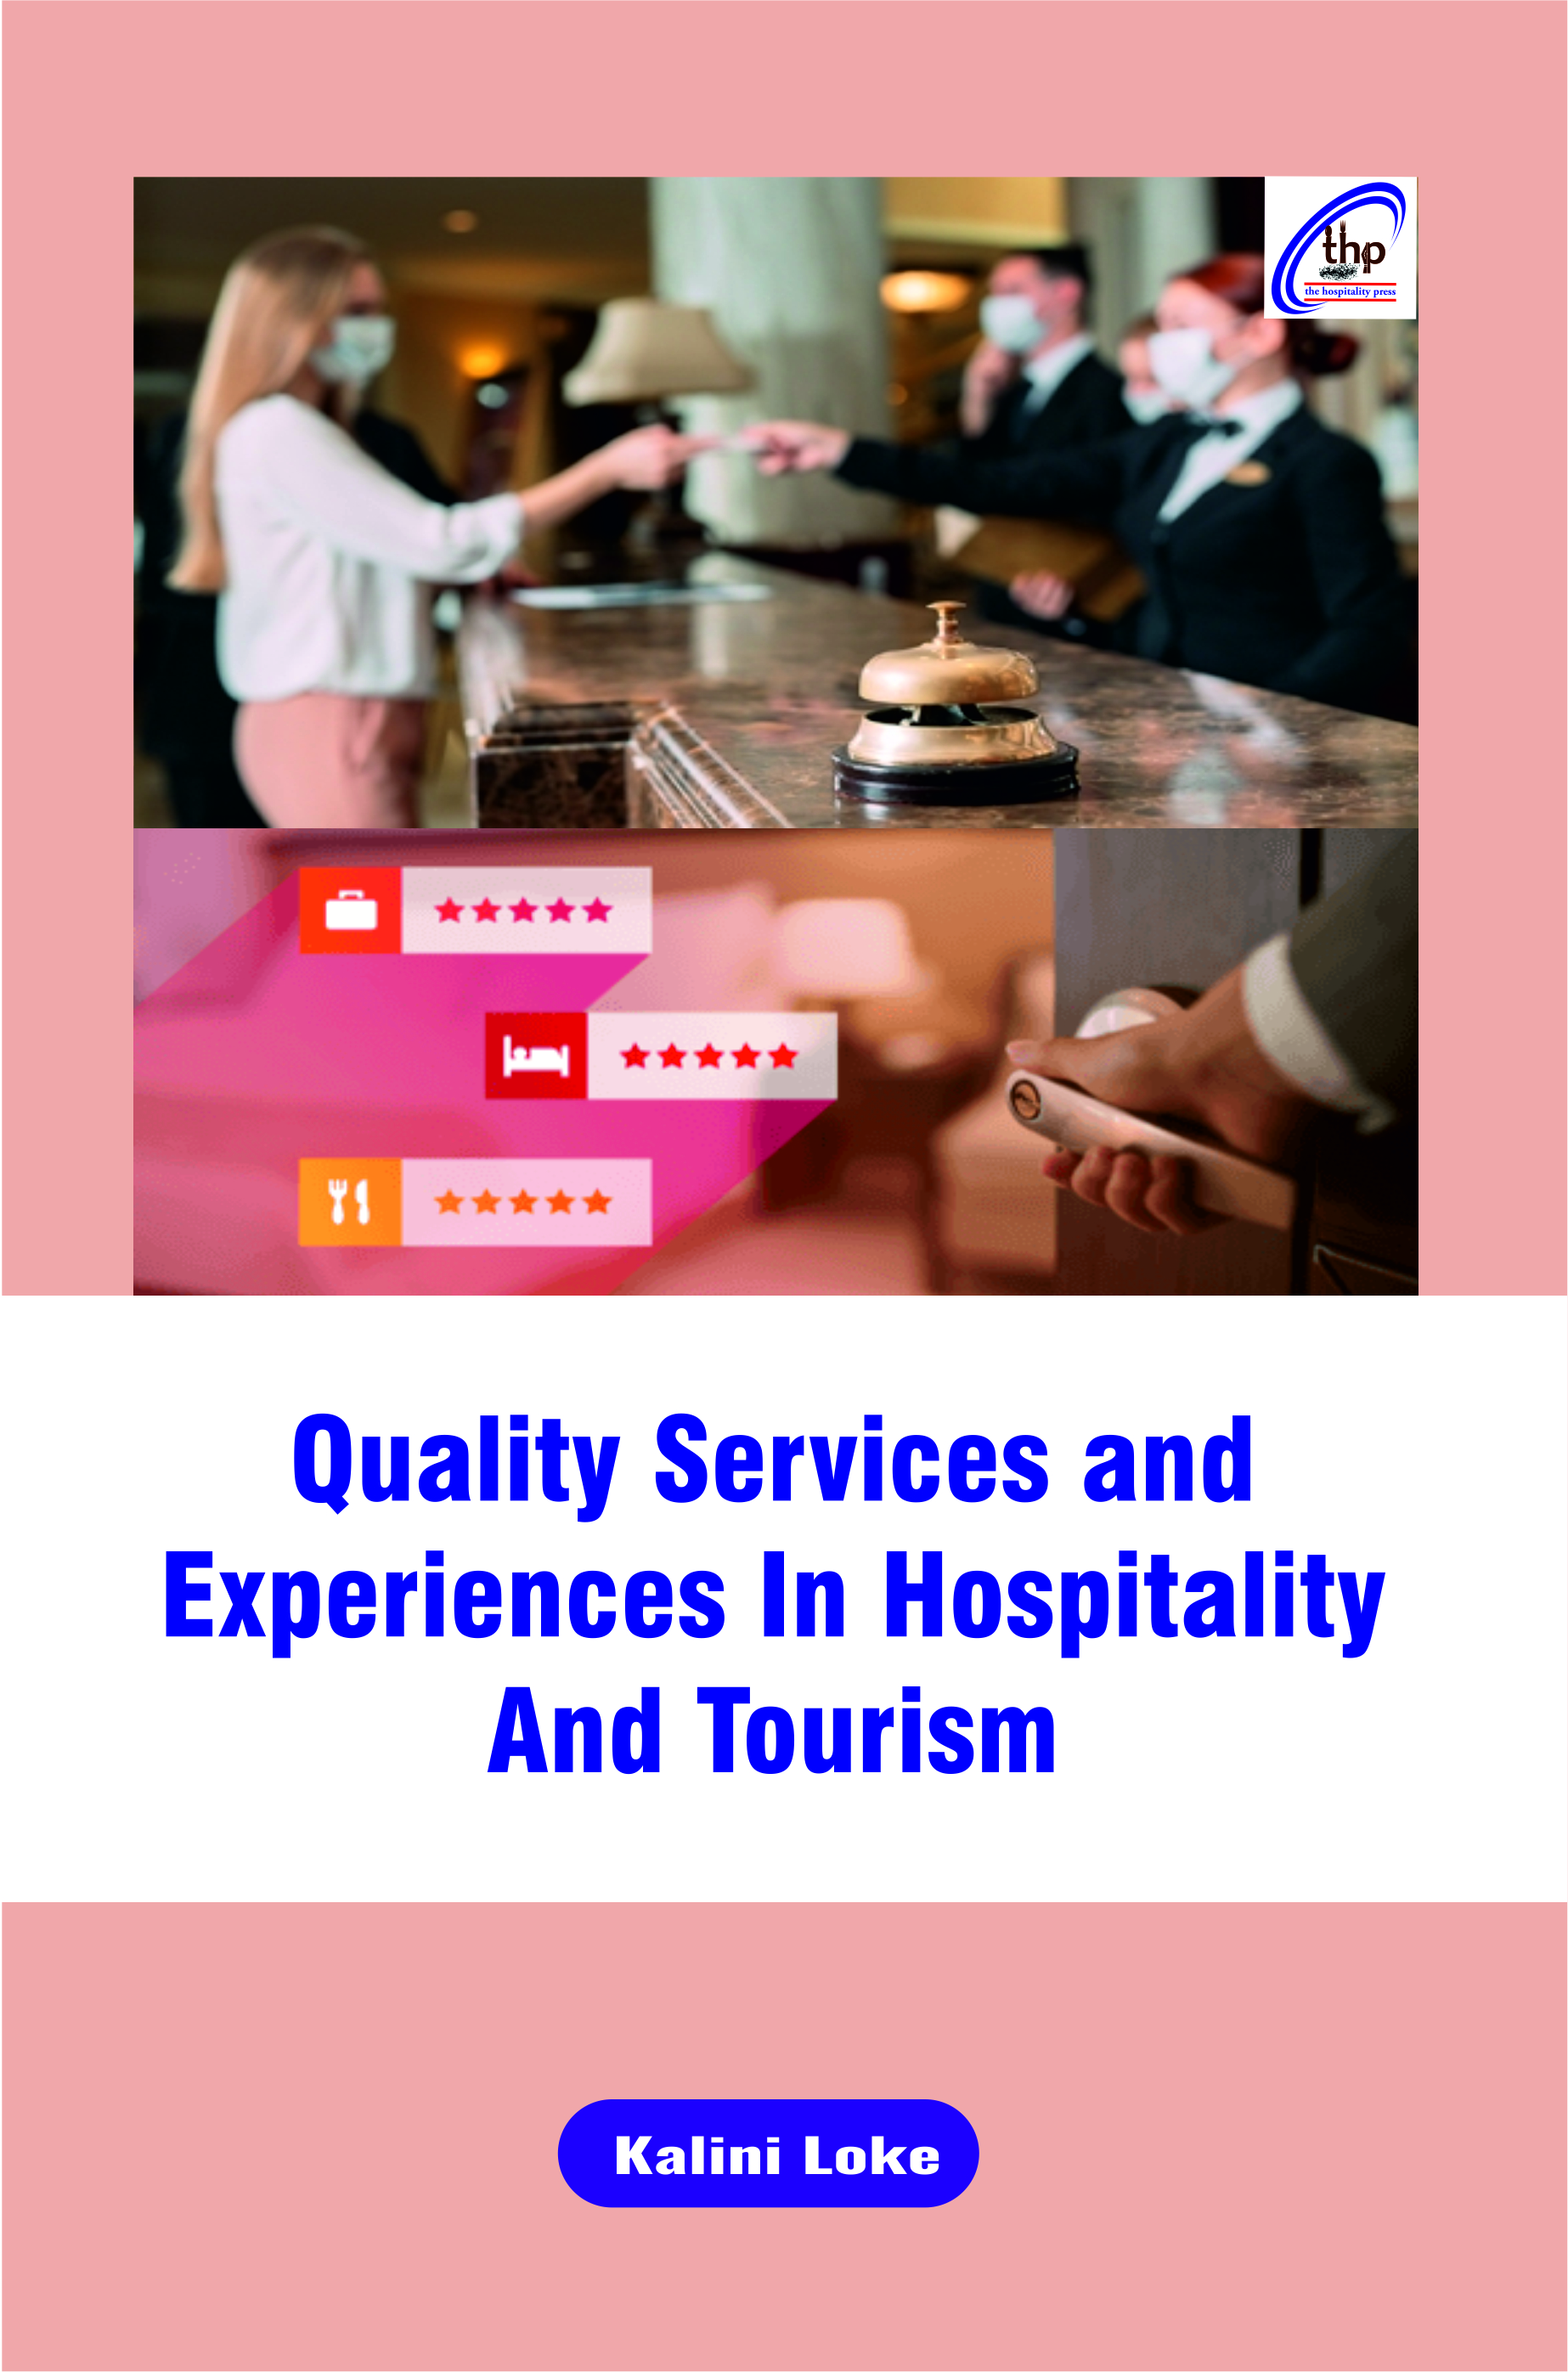 Quality Services and Experiences in Hospitality and Tourism